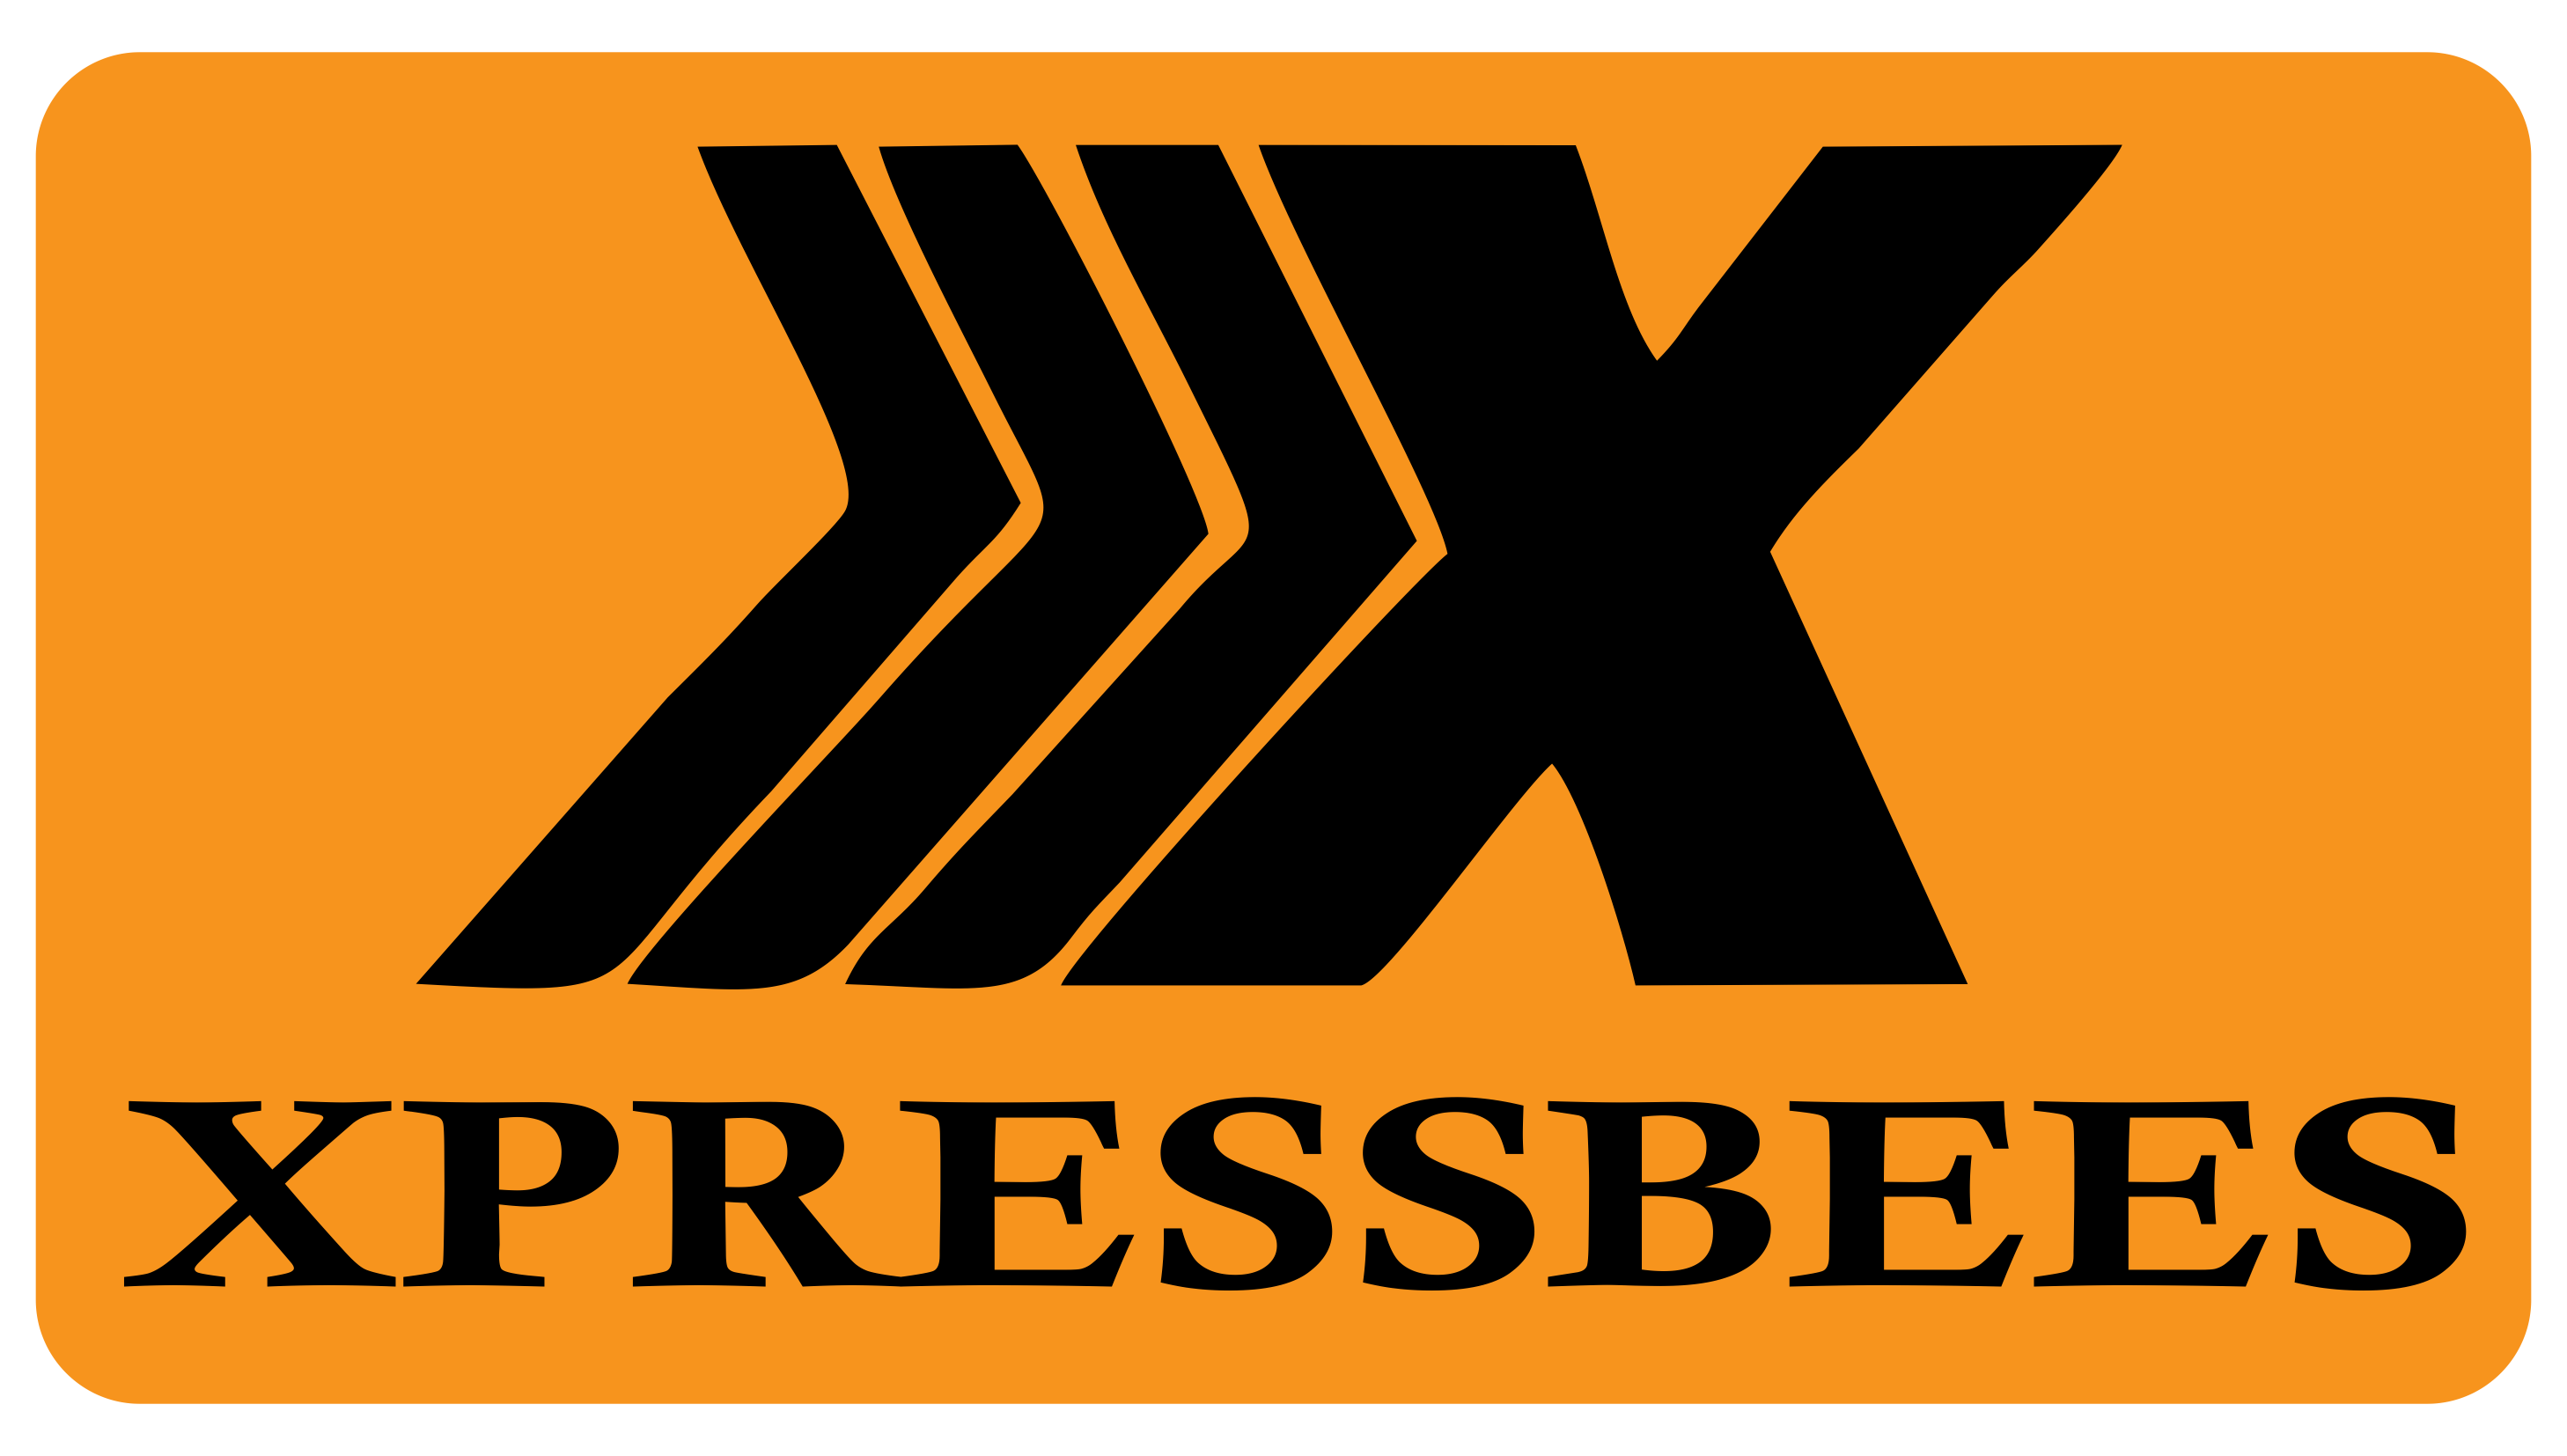 Xpressbees Bags INR 195 Cr From Avendus Future Leaders Fund